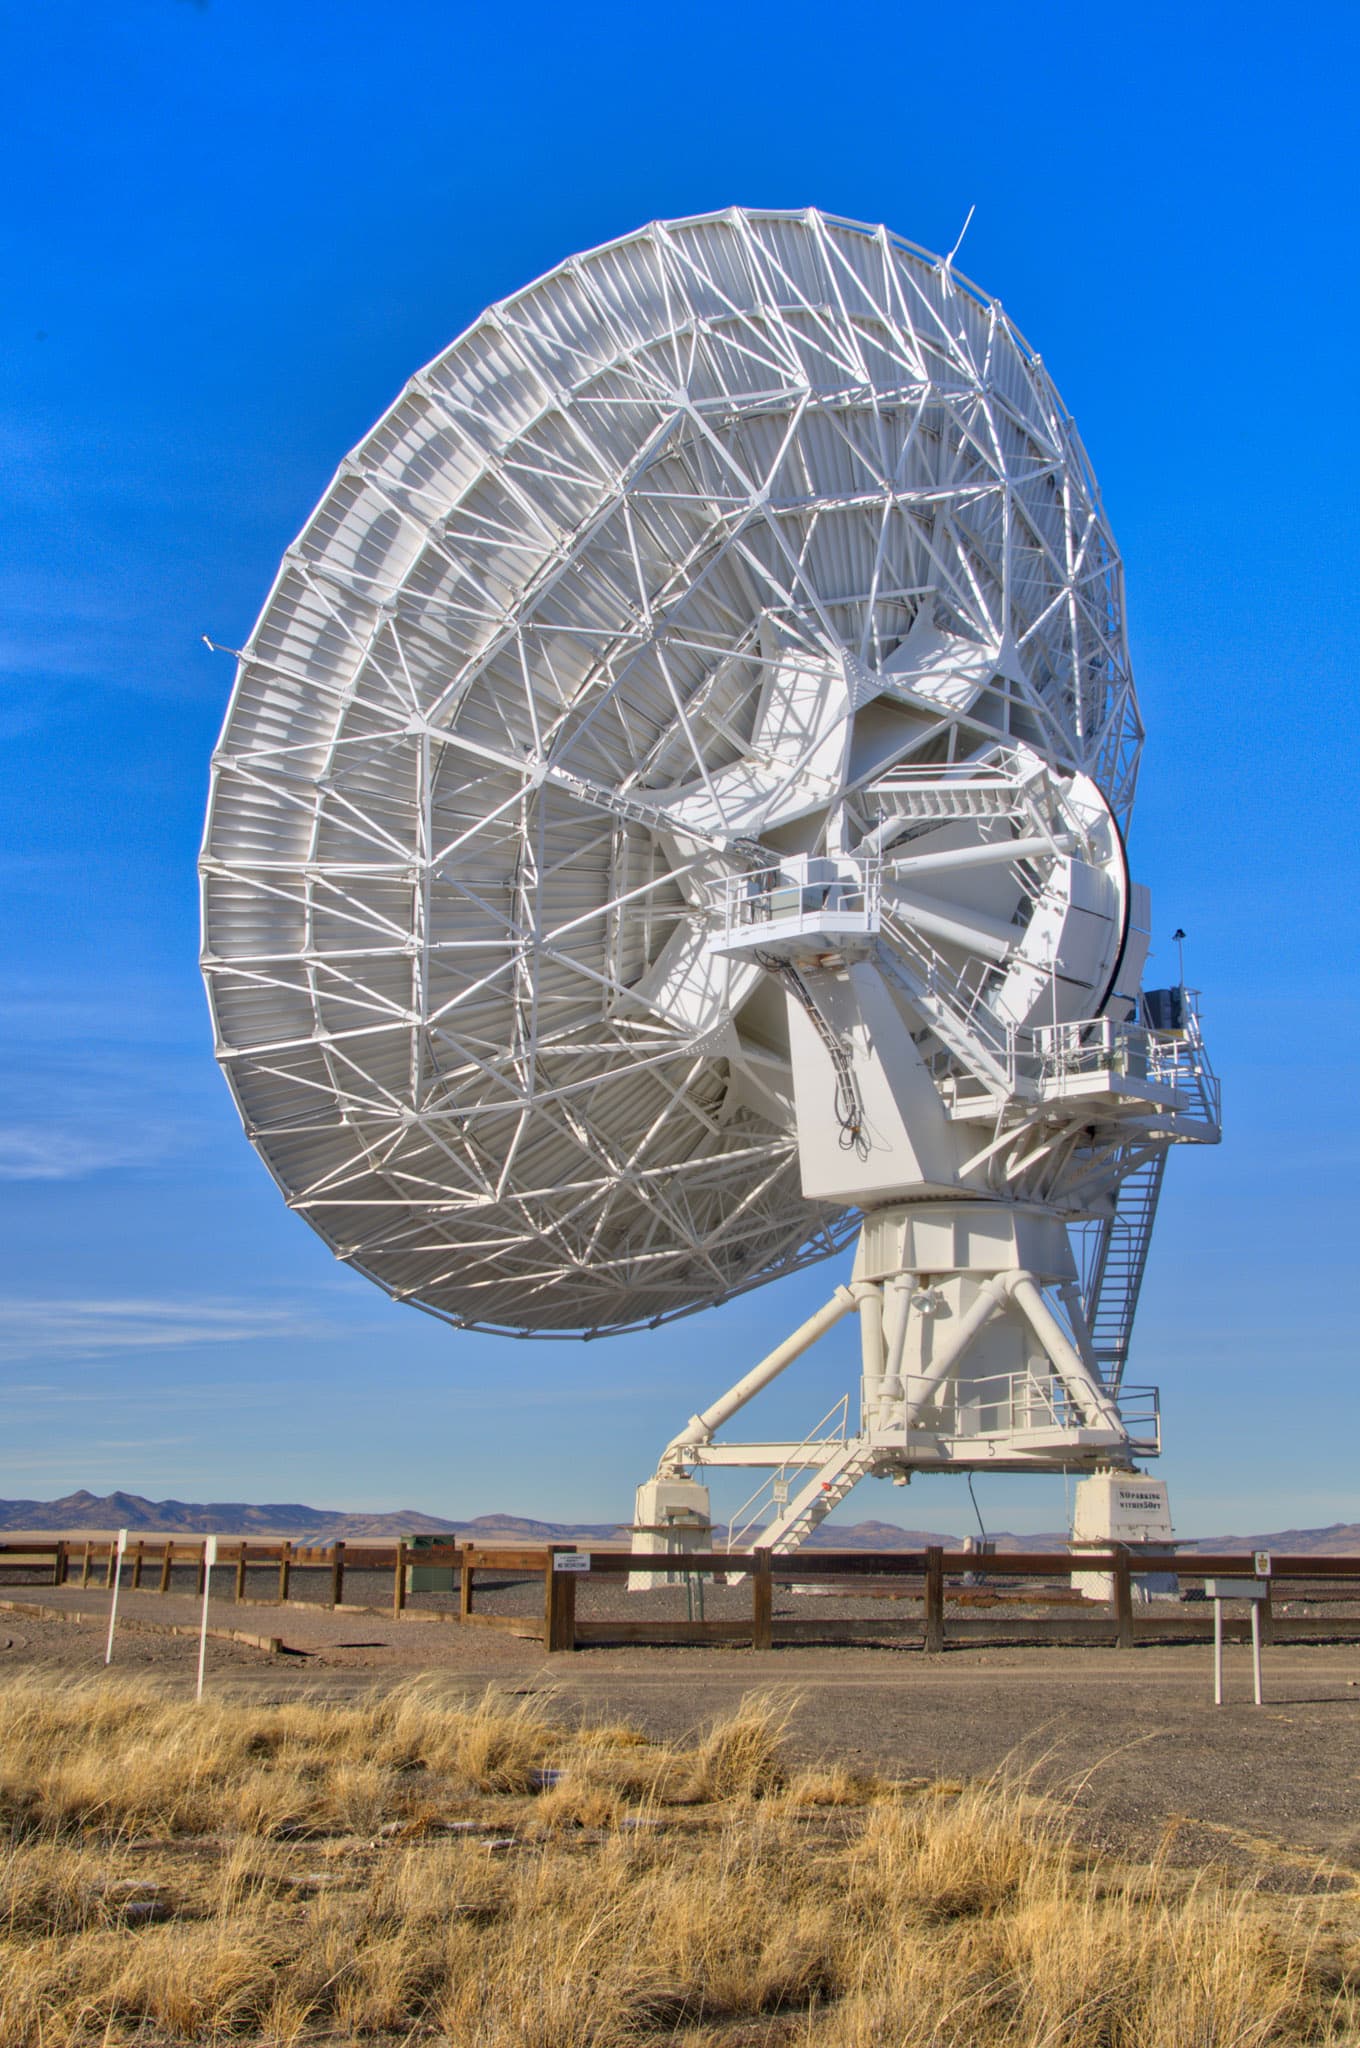 Back end of one of the radio telescopes of the Very Large Array radio observatory, west of Socorro, New Mexico.